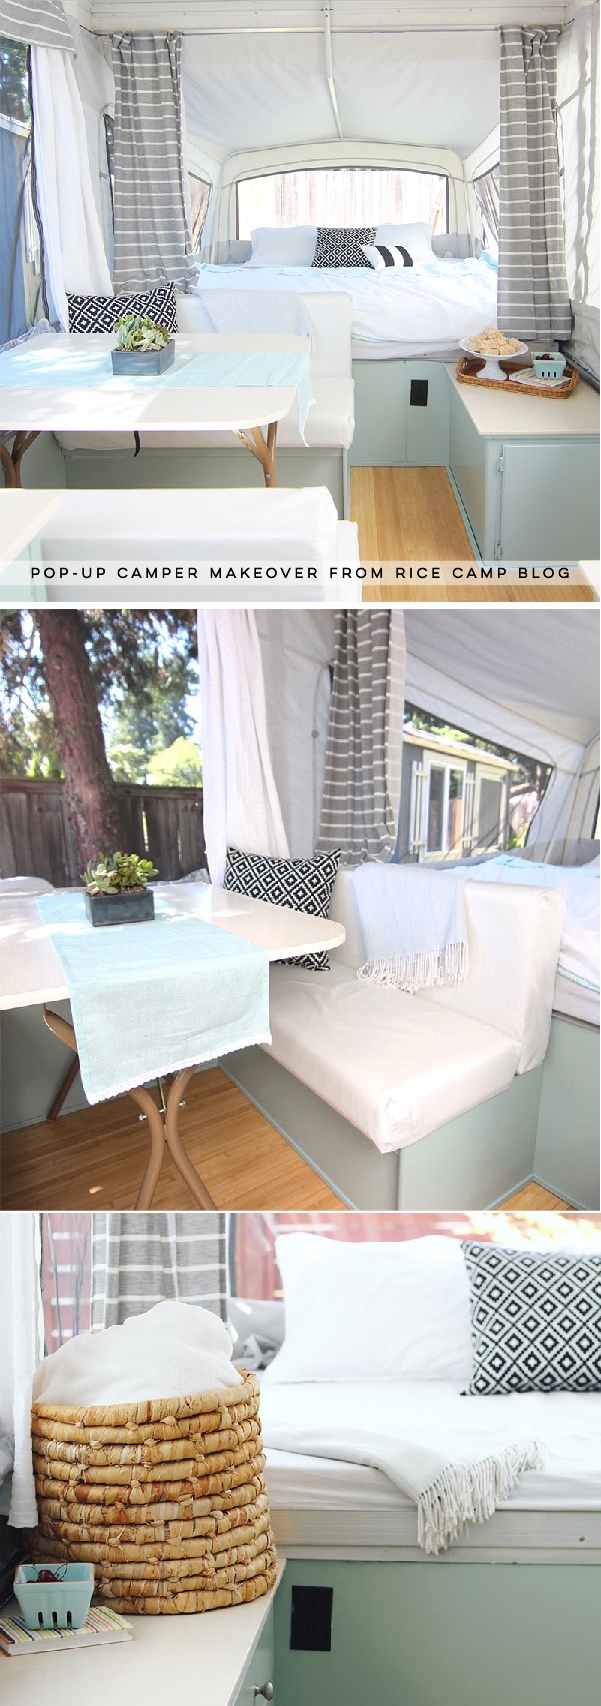 This pop-up camper makeover is bright, airy, and ready for summer! Photo from Rice Camp Blog | Featured on MountainModernLife.com